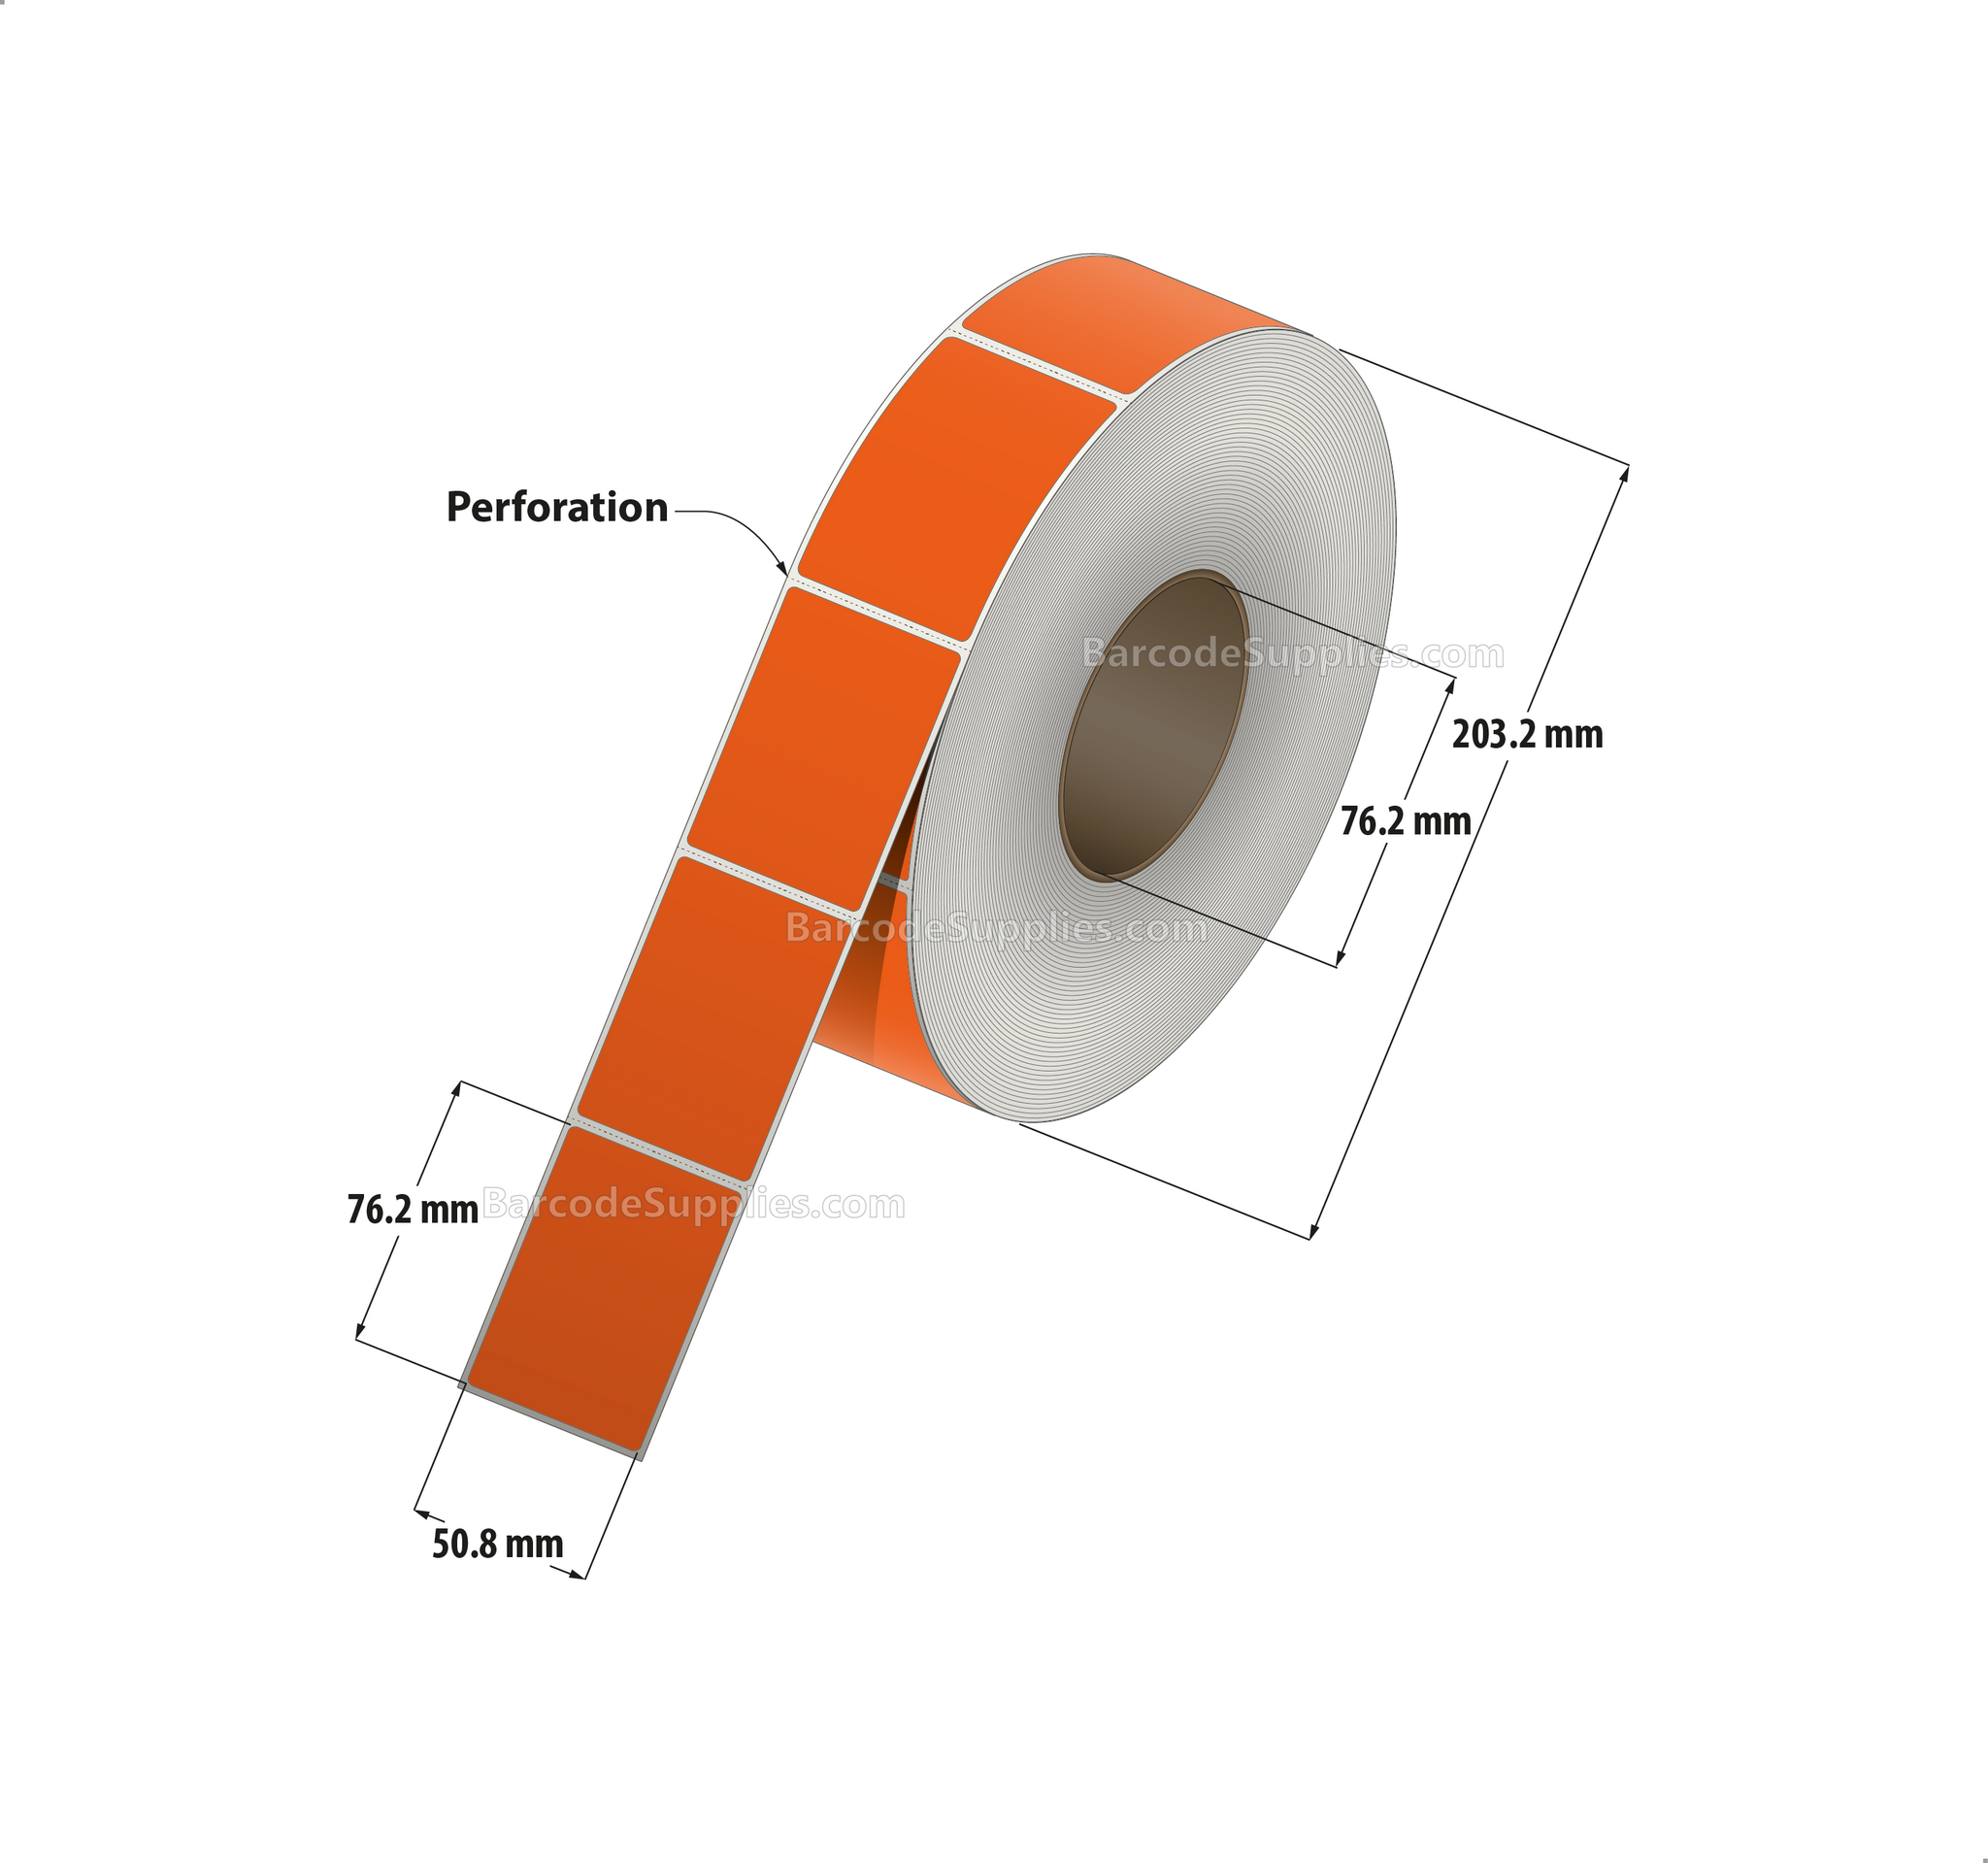 2 x 3 Thermal Transfer 1495 Orange Labels With Permanent Adhesive - Perforated - 1900 Labels Per Roll - Carton Of 8 Rolls - 15200 Labels Total - MPN: RFC-2-3-1900-OR